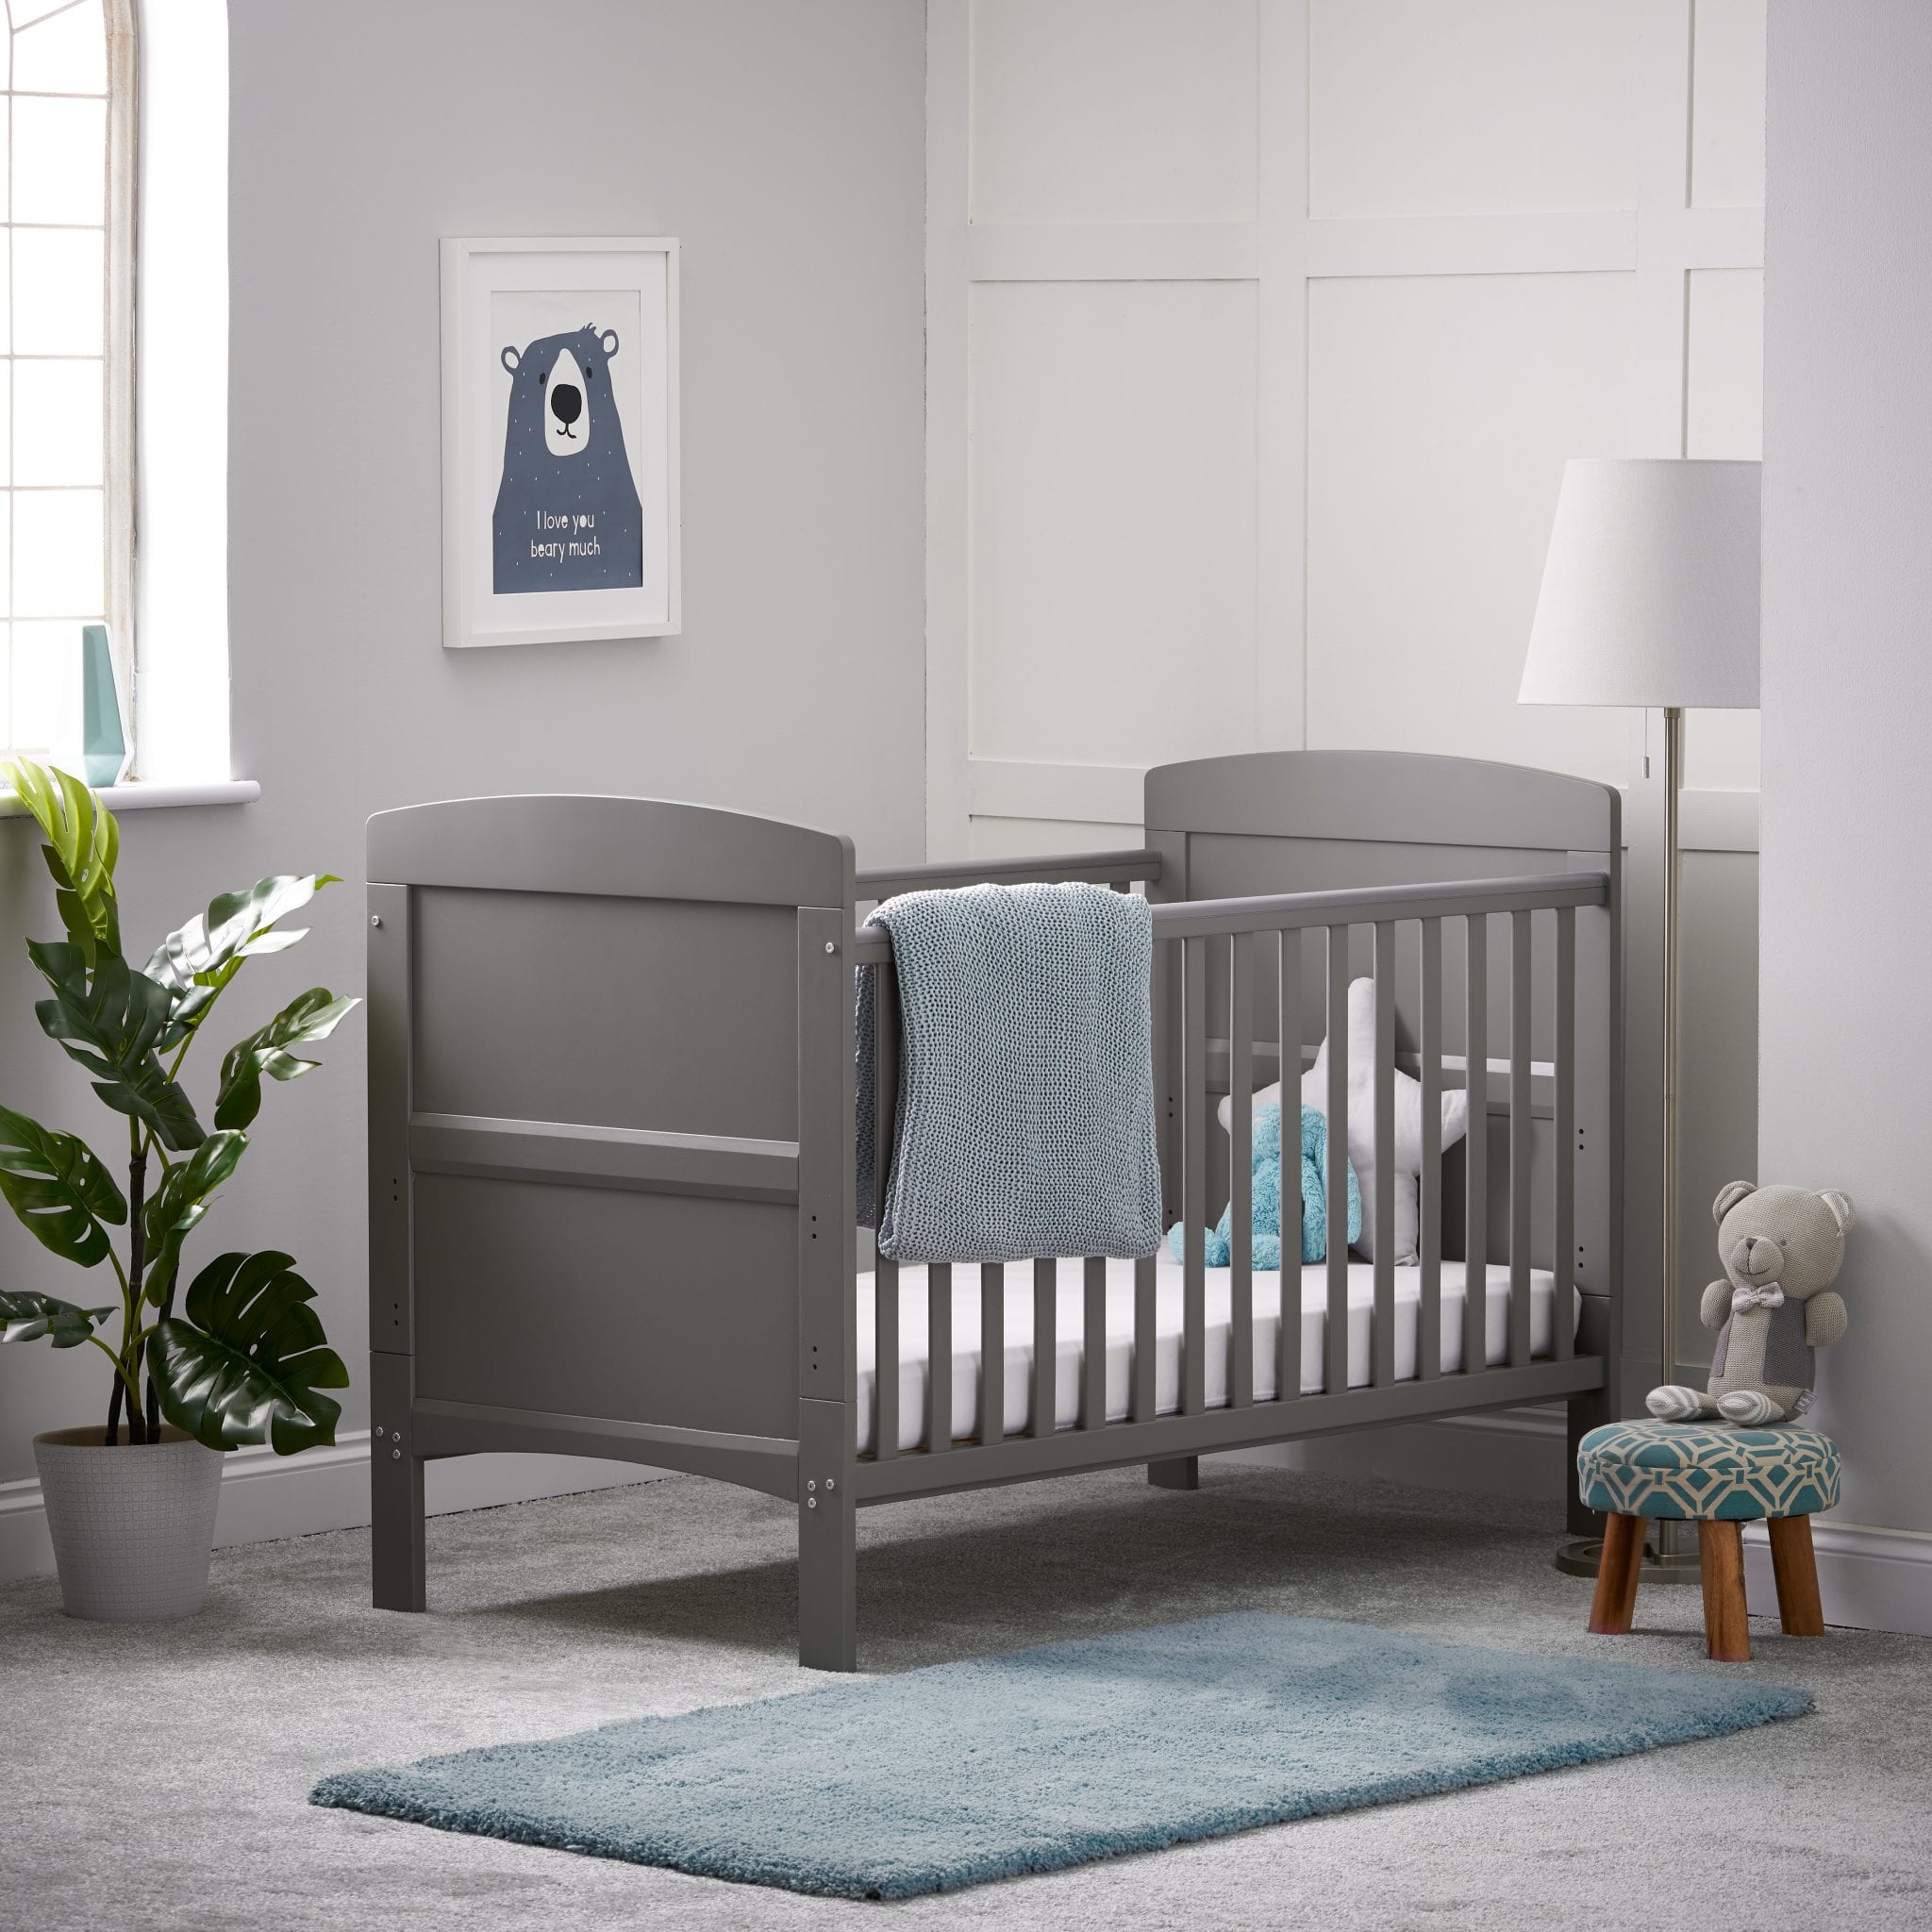 Obaby Cot & Cot Bed Taupe Grey OBABY Grace 3 Piece Room Set - Direct Delivery